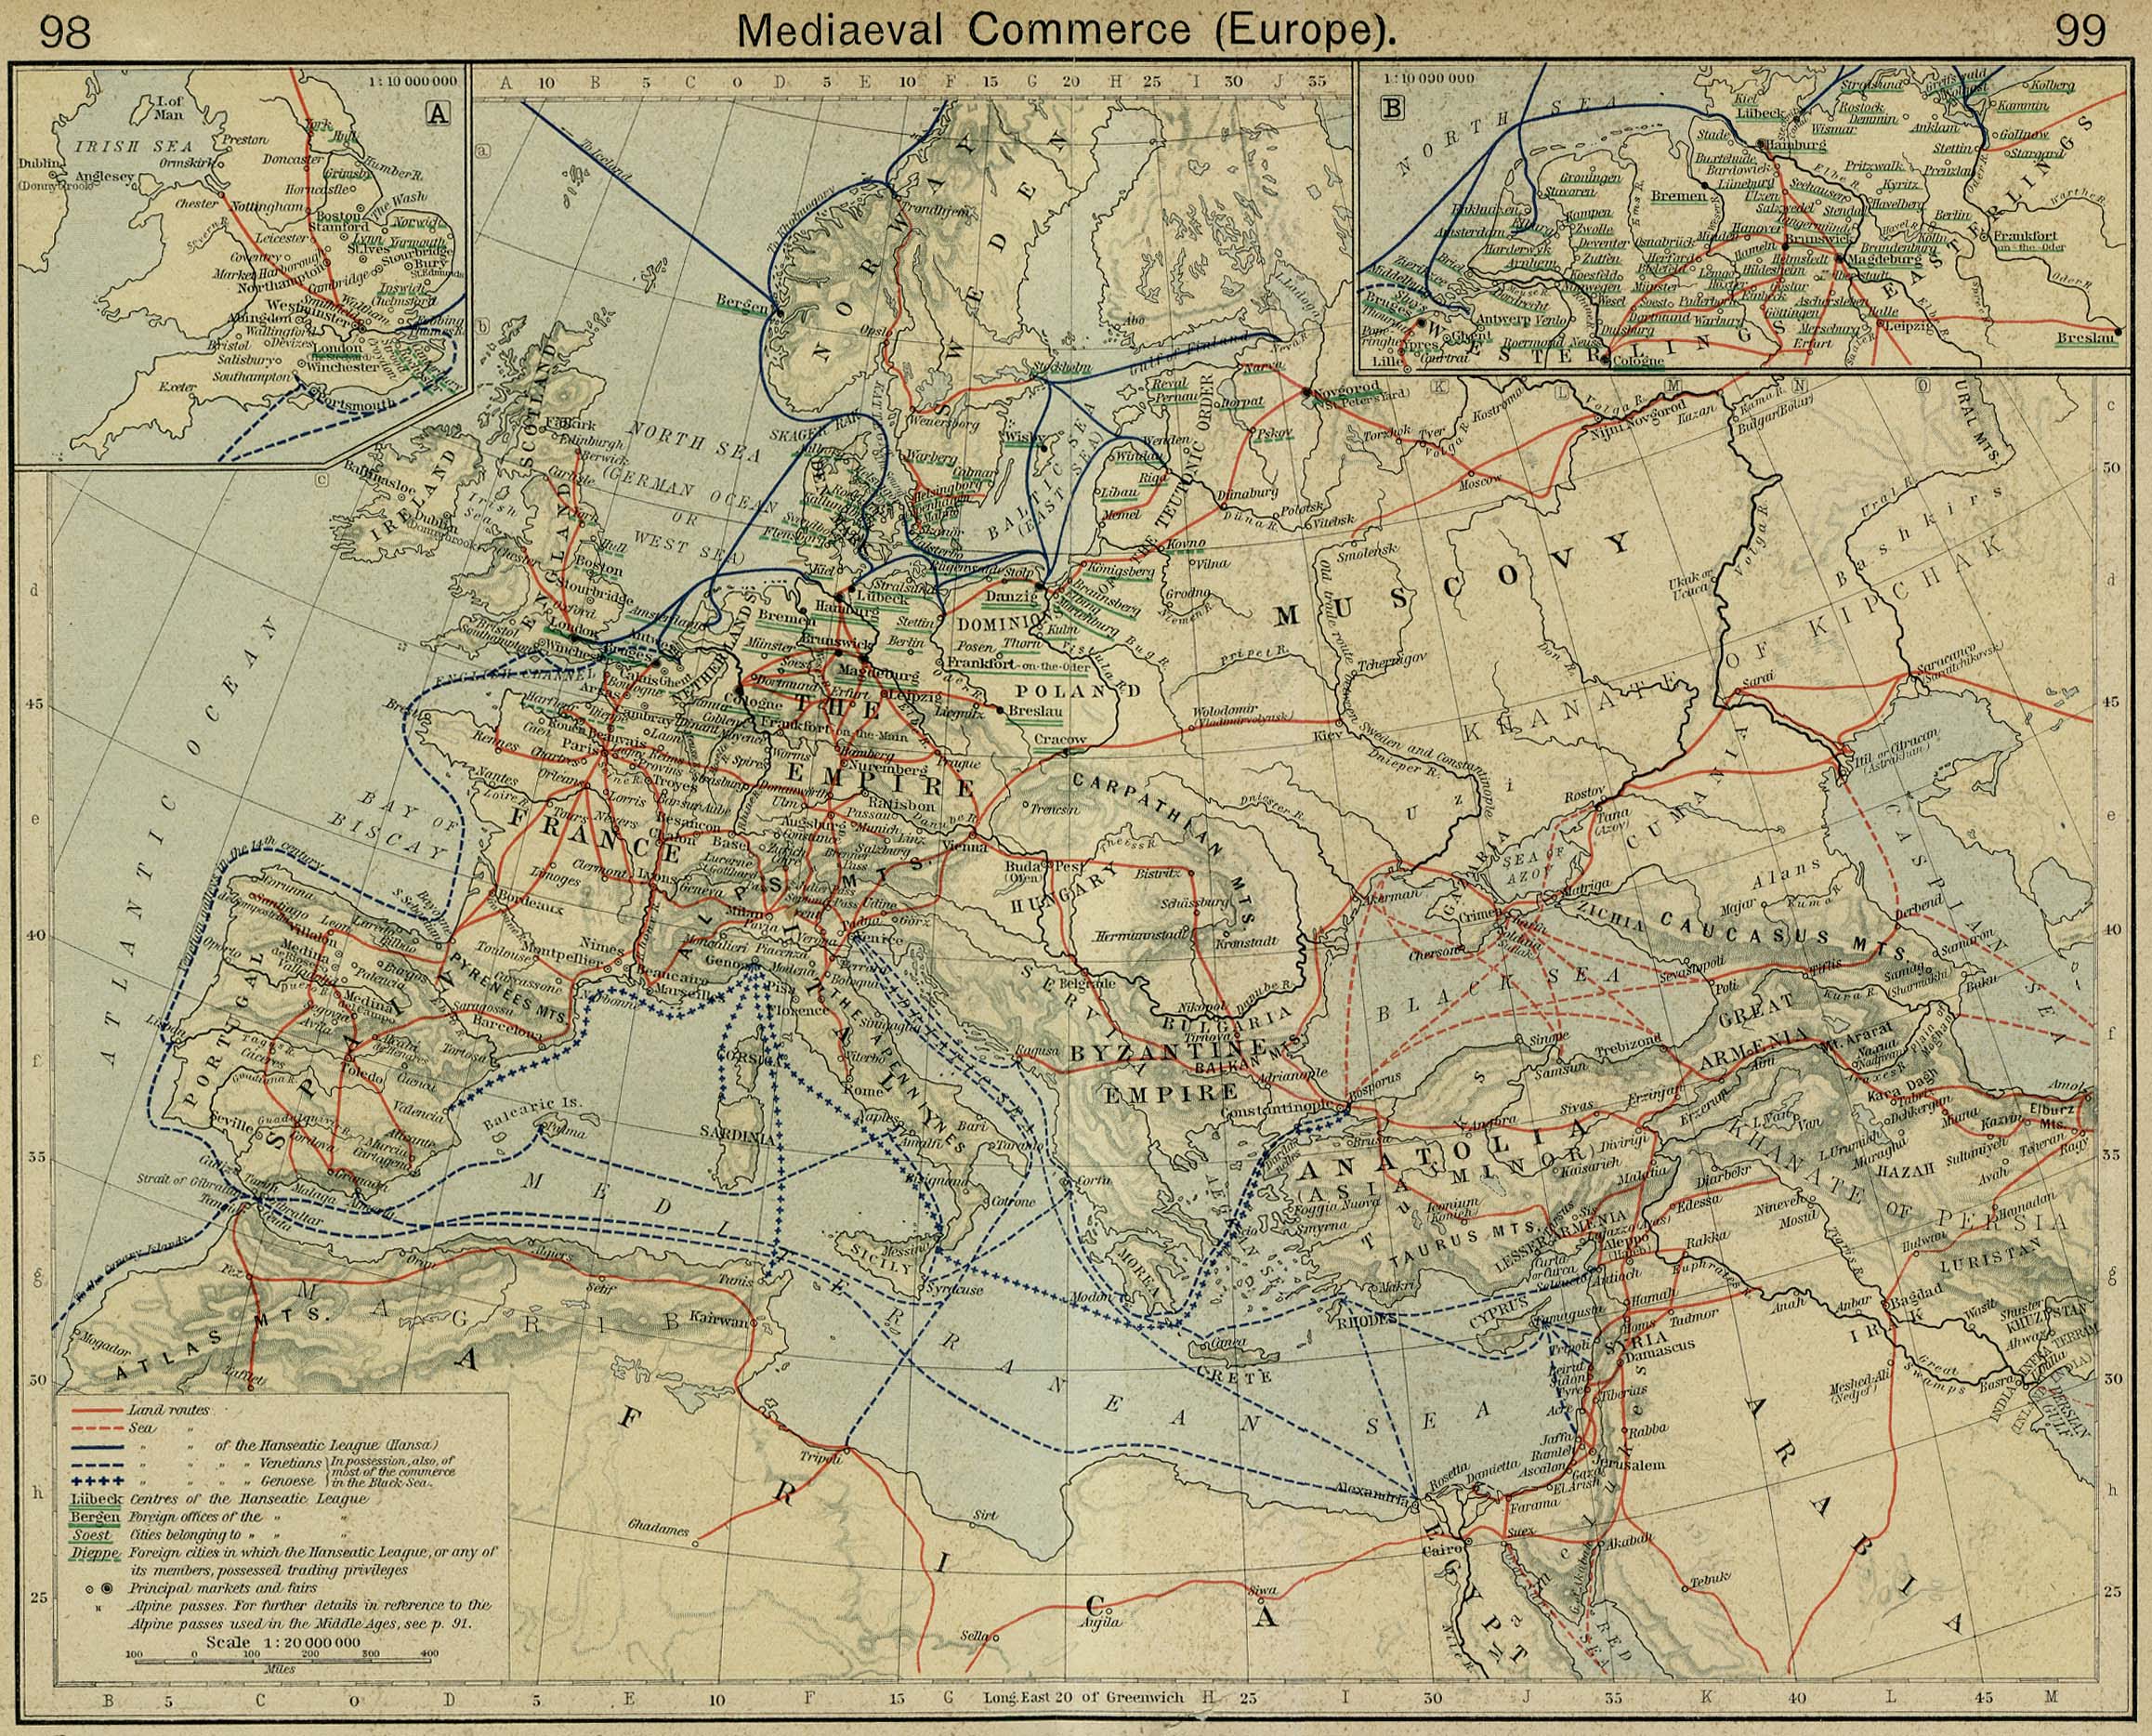 Europe Maps Wallpaper 2316x1868 Europe Maps Medieval Cartography